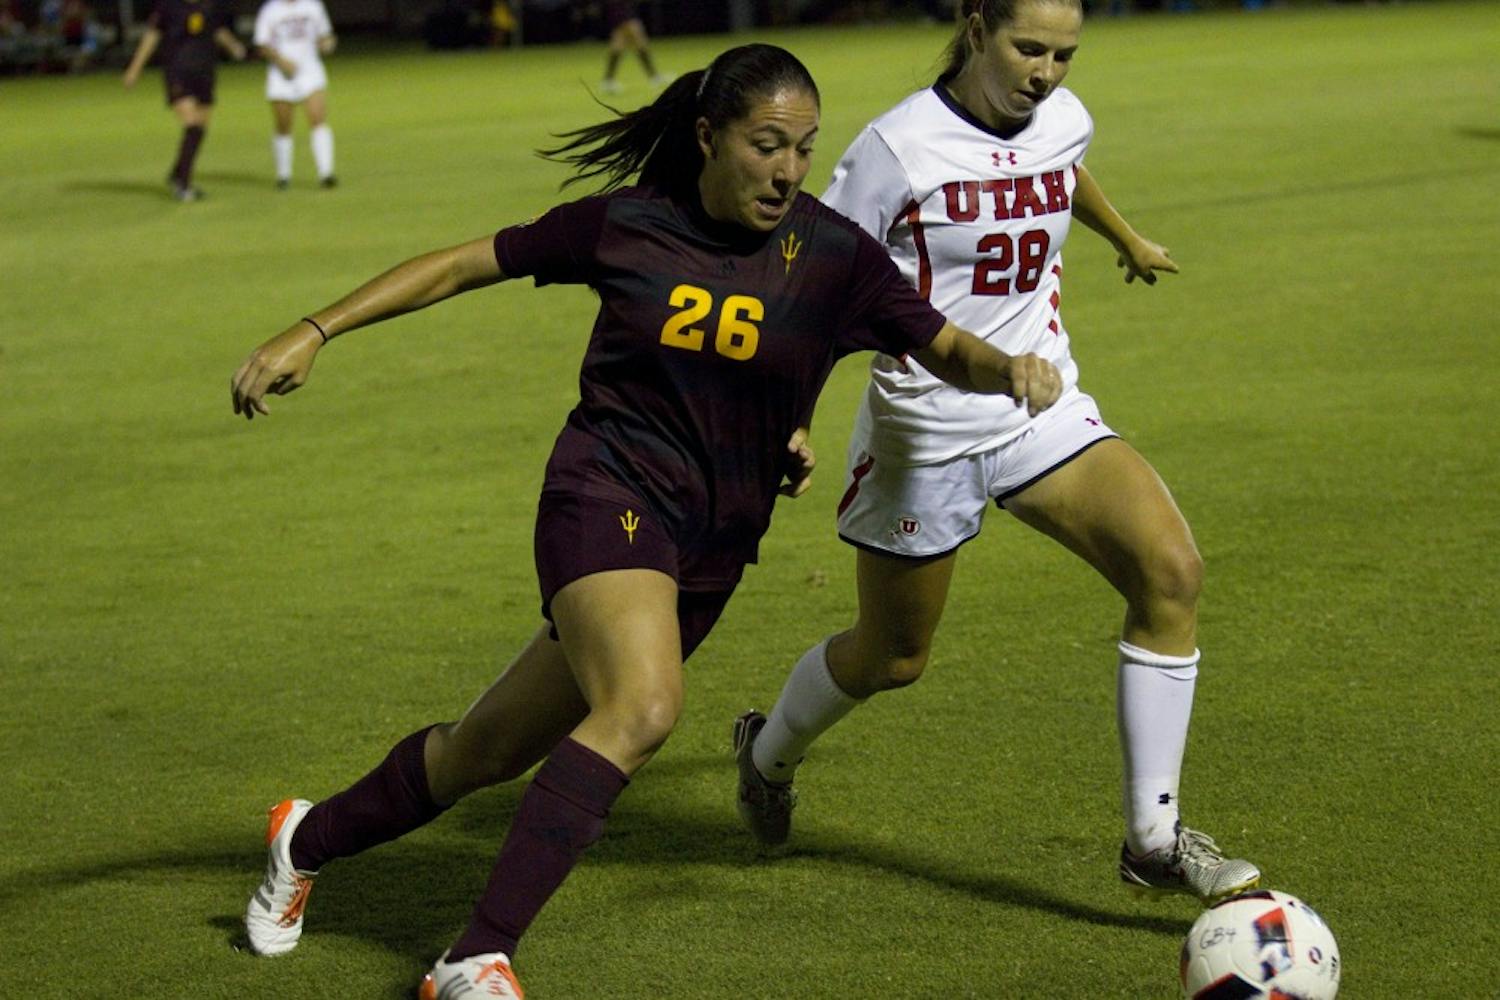 ASU sophomore forward Natalie Stephens tries to get the ball from a Utah defender in the 1-1 draw against the Utah Utes in Sun Devil Soccer Stadium in Tempe, Arizona, on Thursday, Sept. 29, 2016.